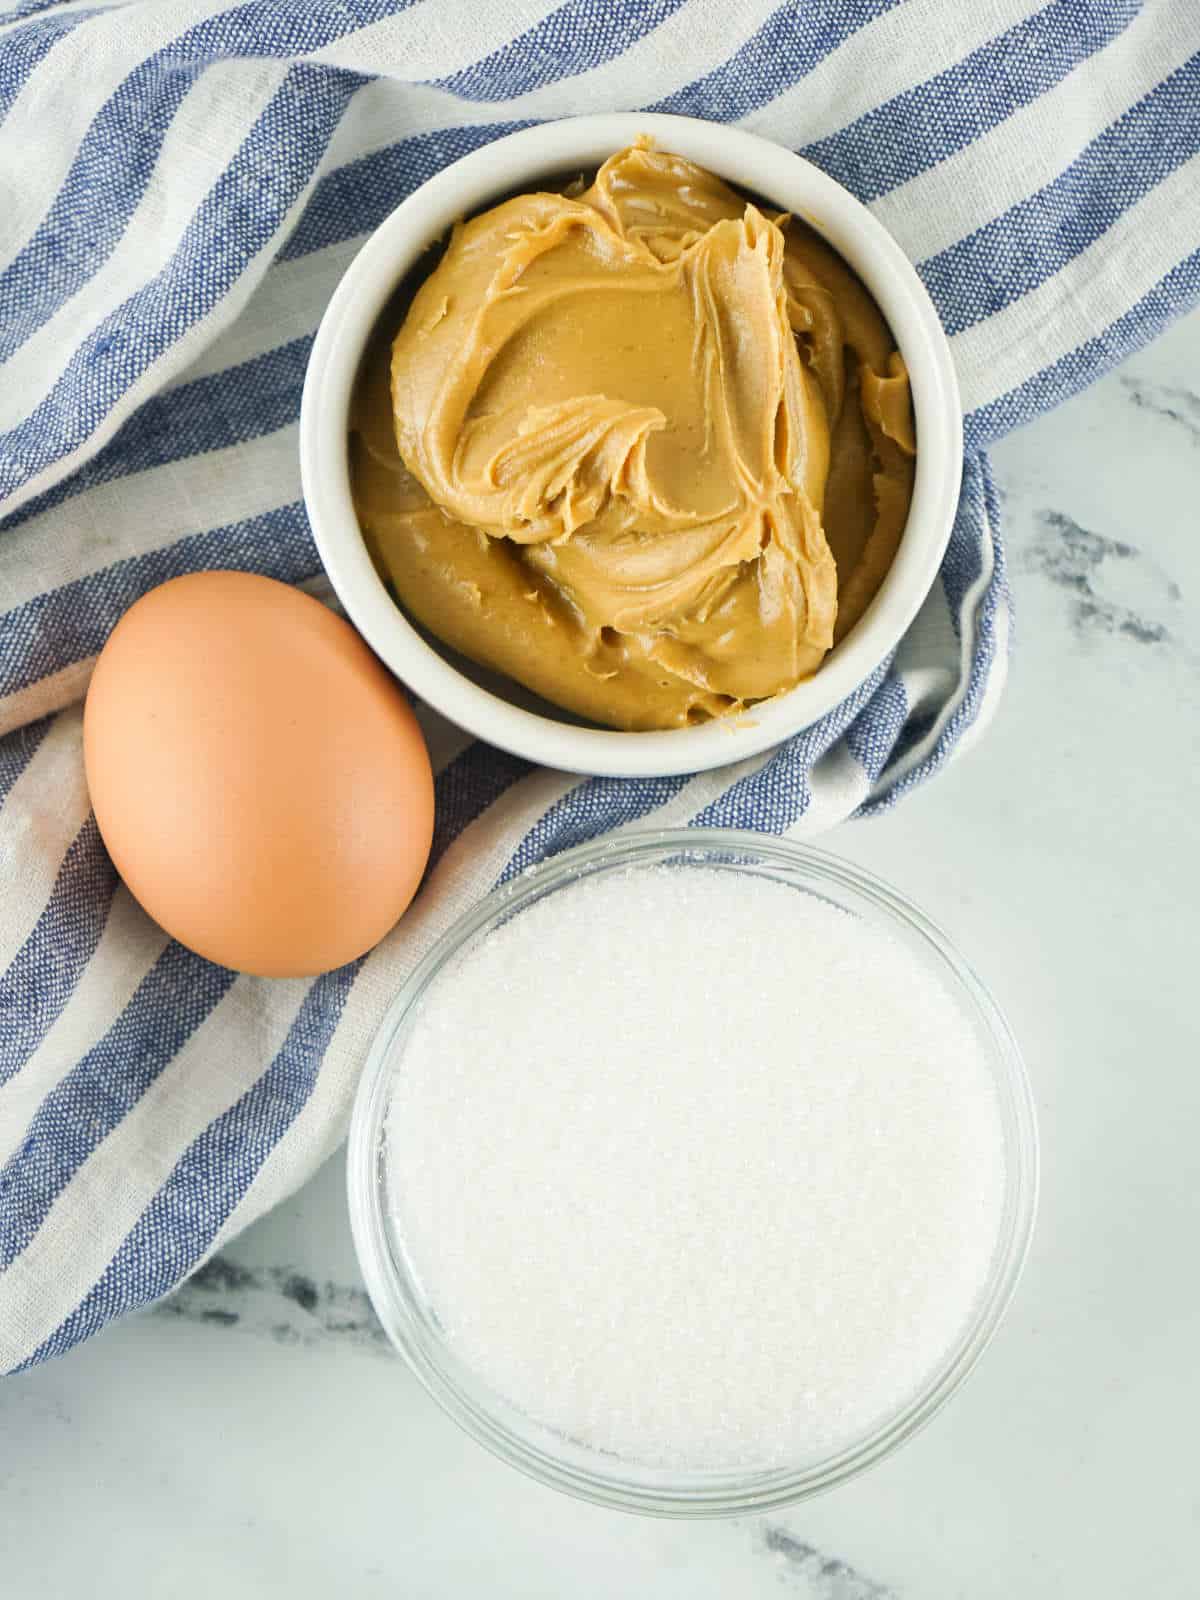 Bowls of peanut butter, sucralose, and an egg.